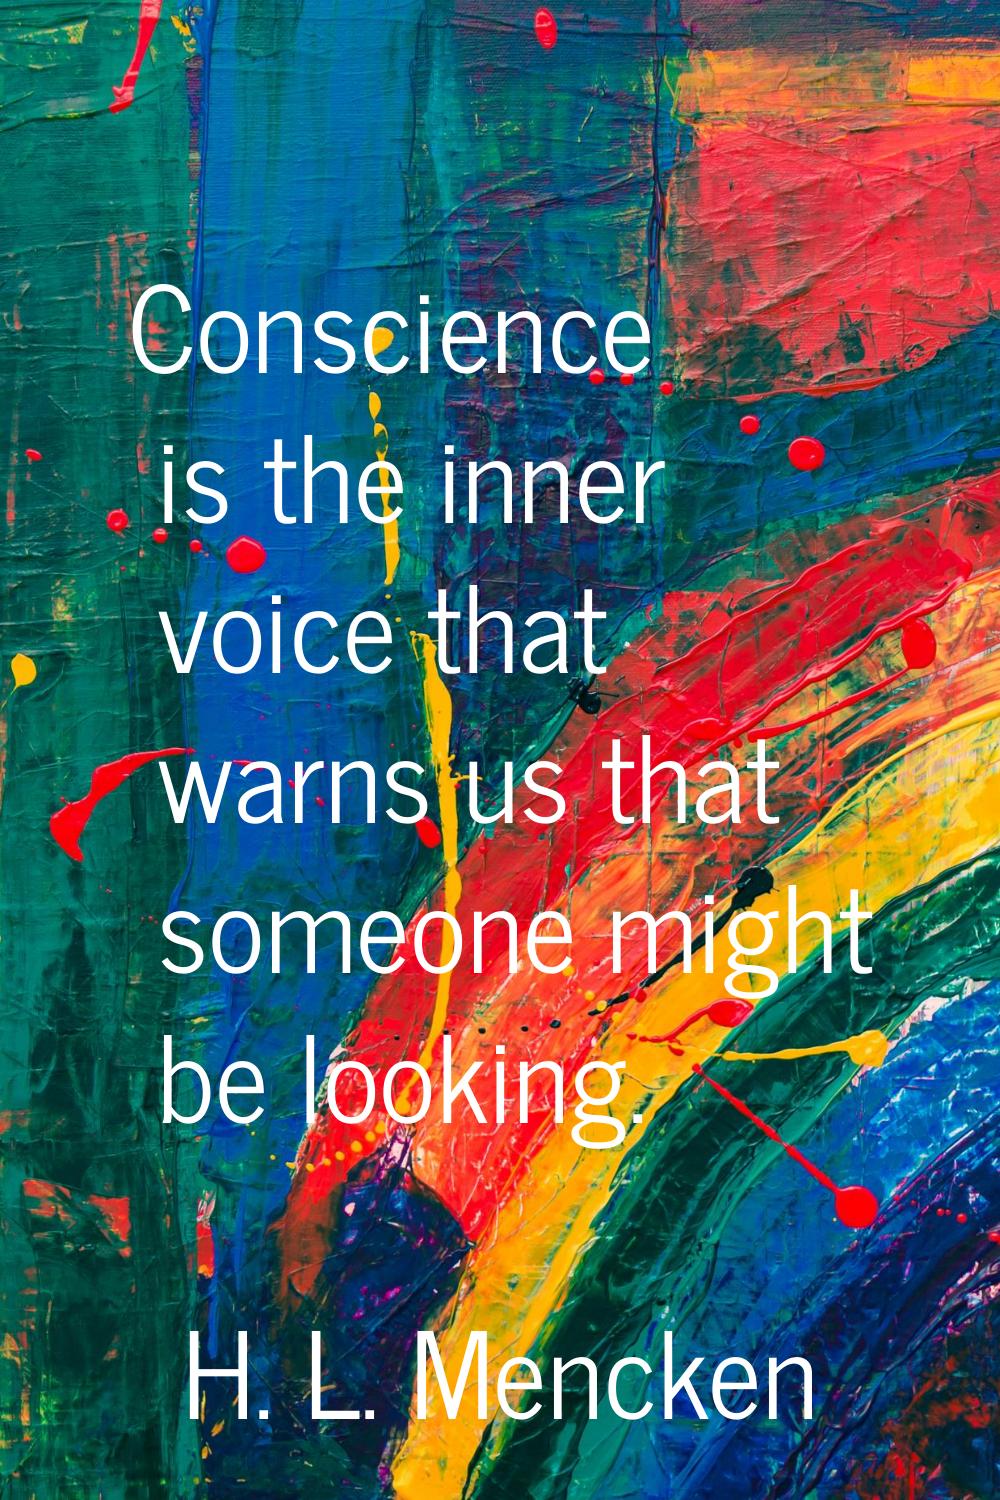 Conscience is the inner voice that warns us that someone might be looking.